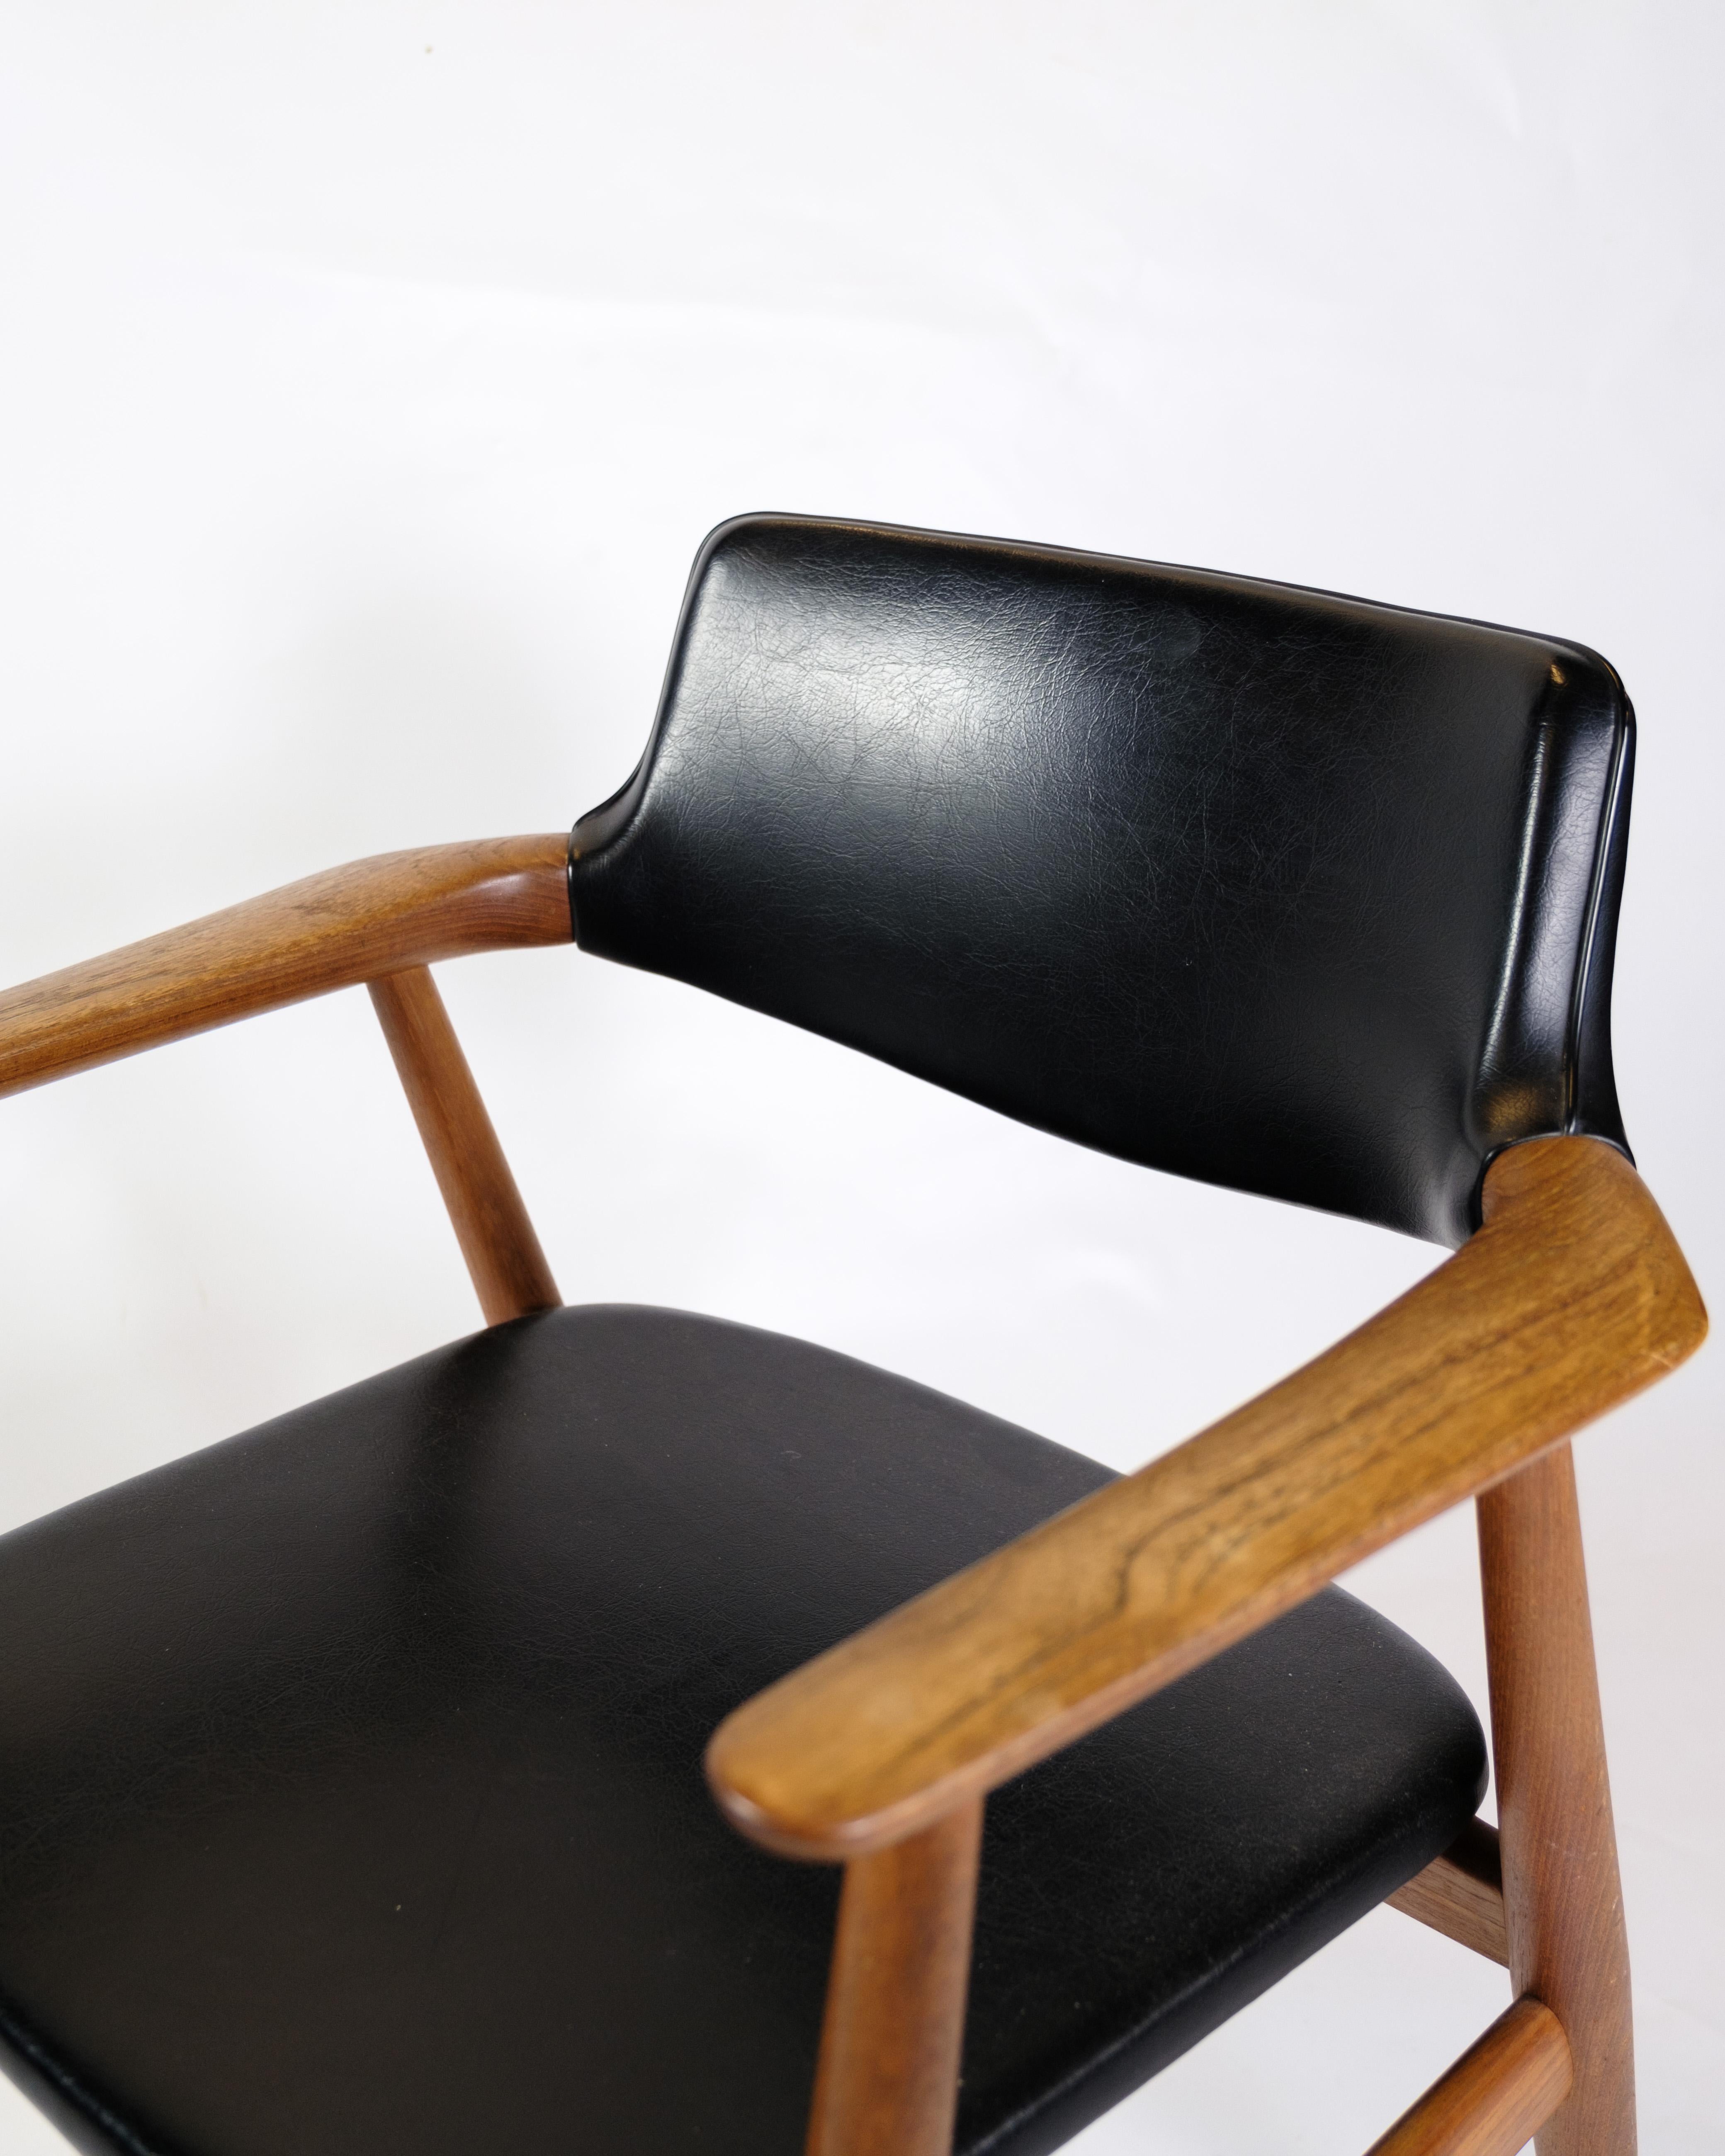 Armchair With Stool Model GM11 Chair By Svend E. Andersen From 1960s In Good Condition For Sale In Lejre, DK